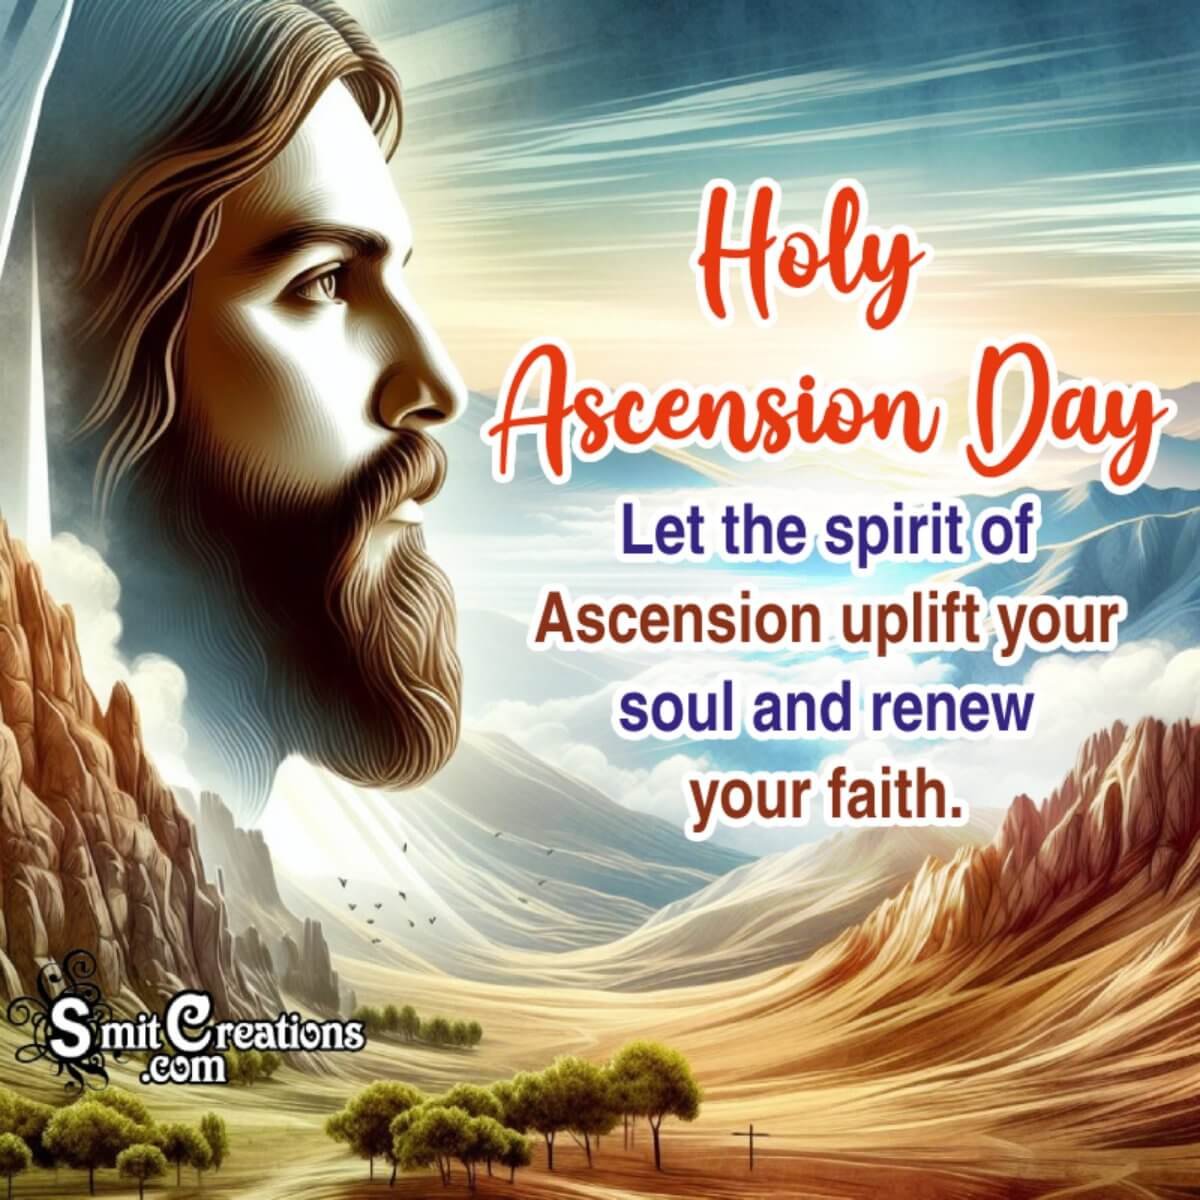 Holy Ascension Day Status Image